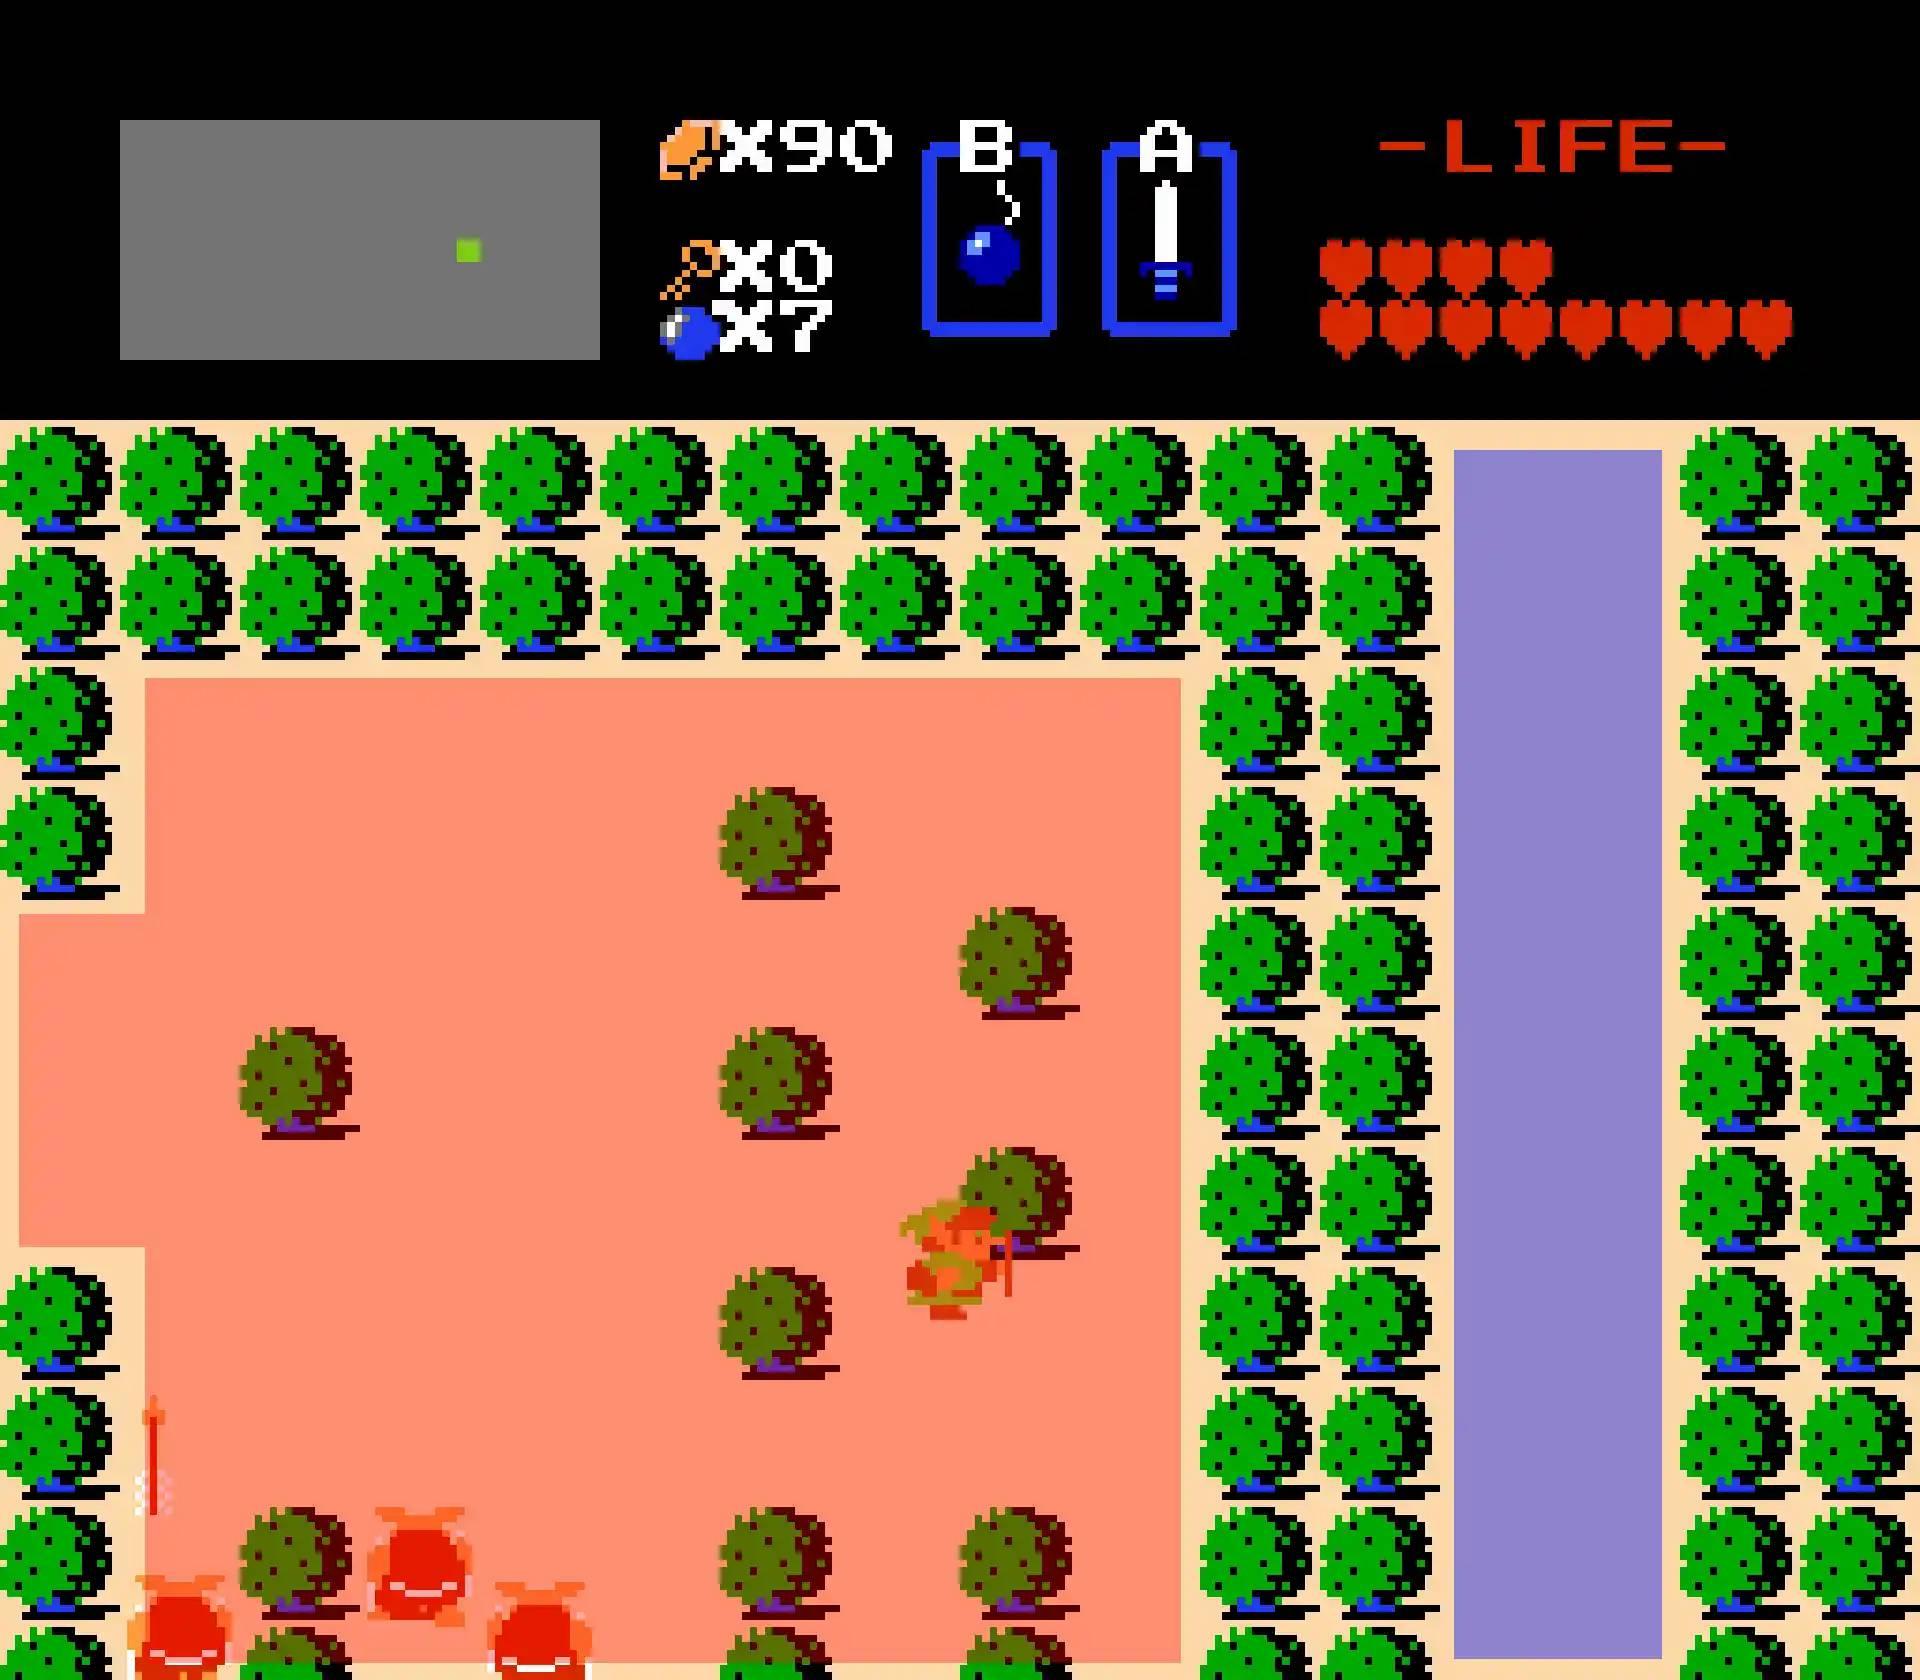 Link can't reach the blue area from the red area where he's standing